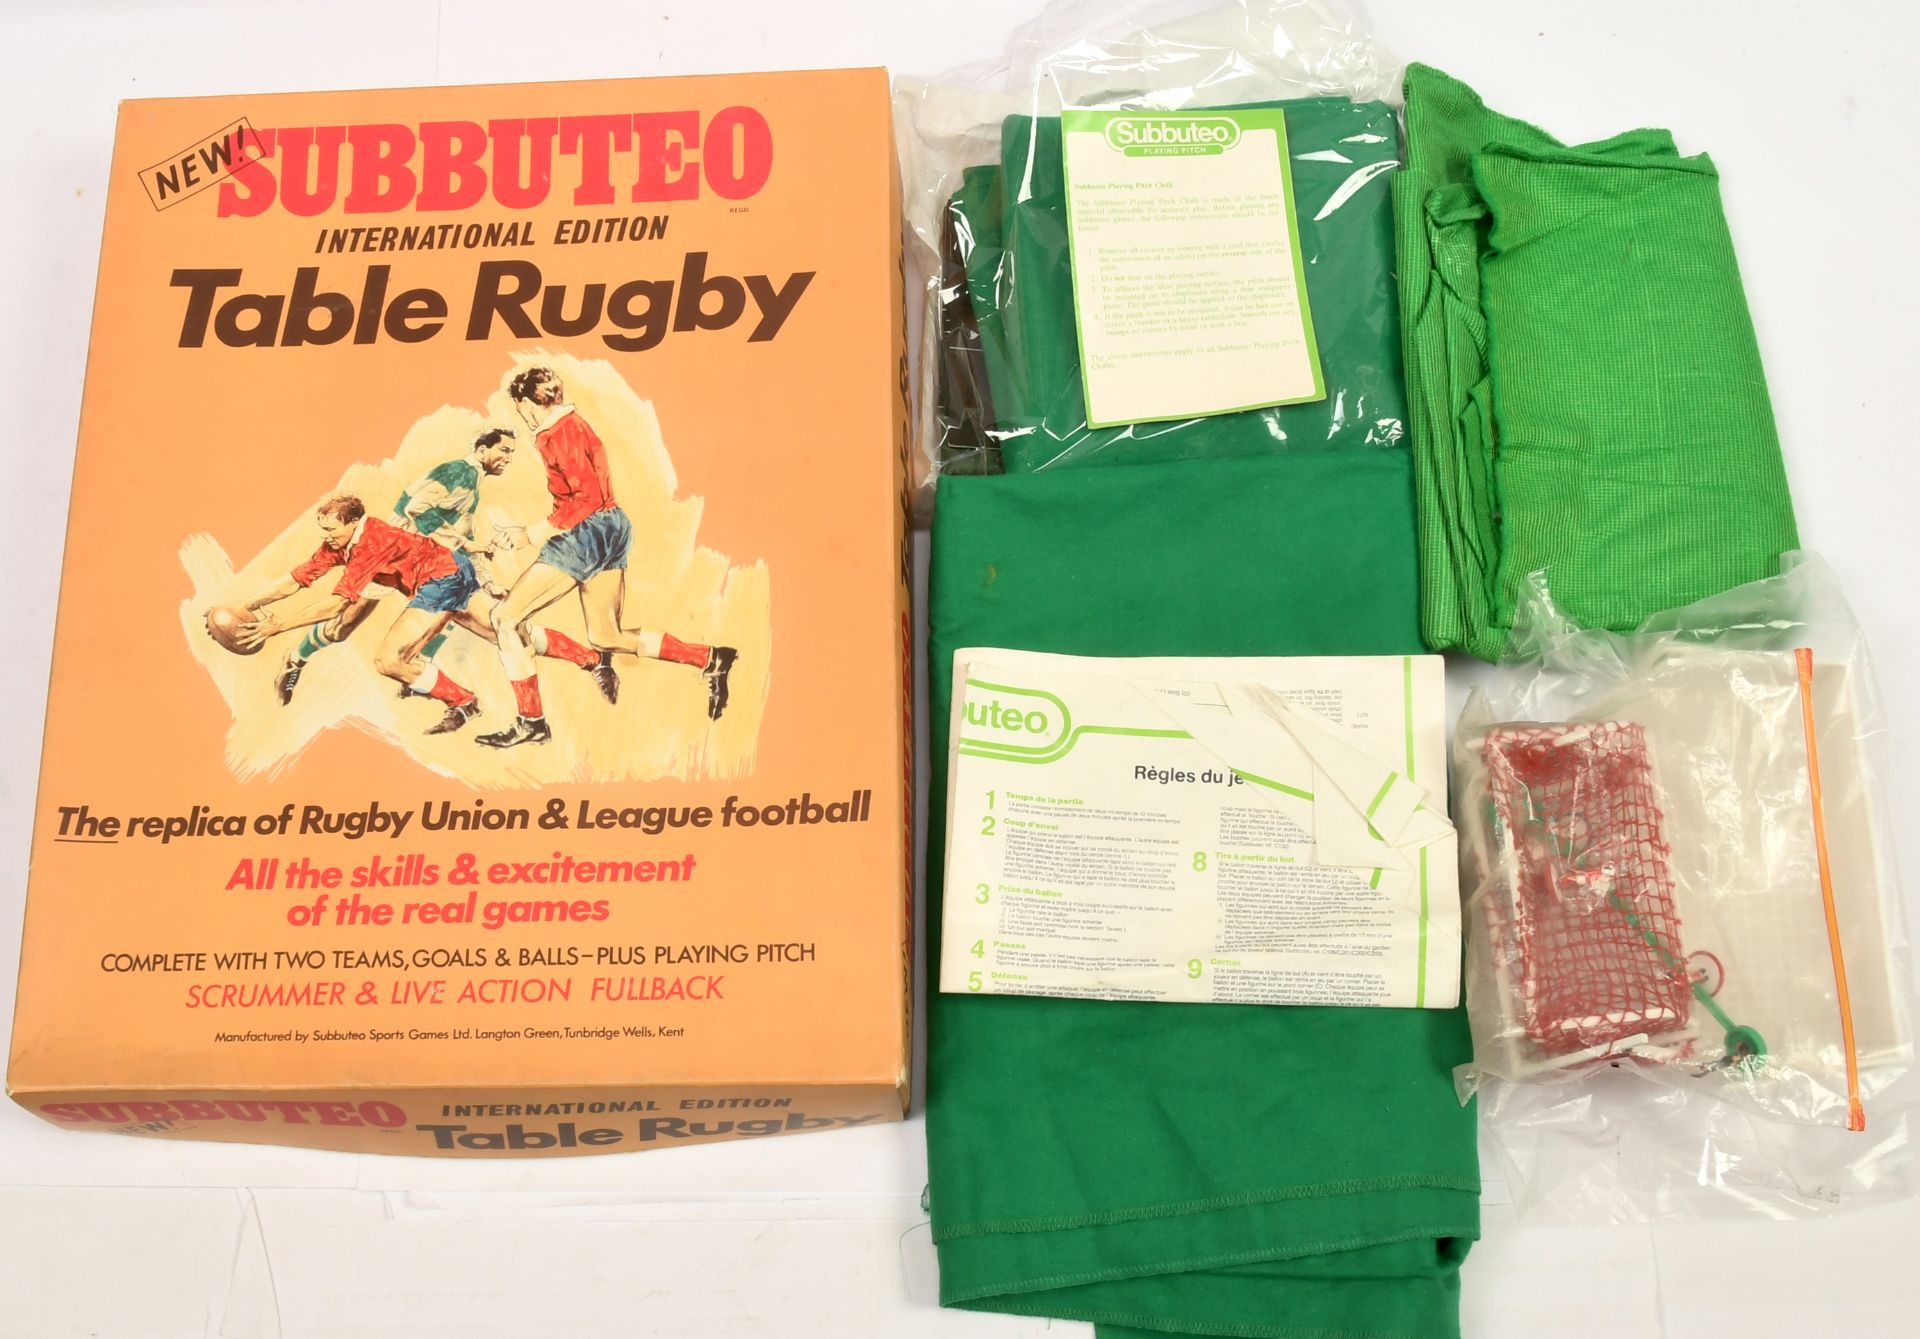 Subbuteo International Edition Table Rugby Boxed game with original Rugby Balls - appears complet...